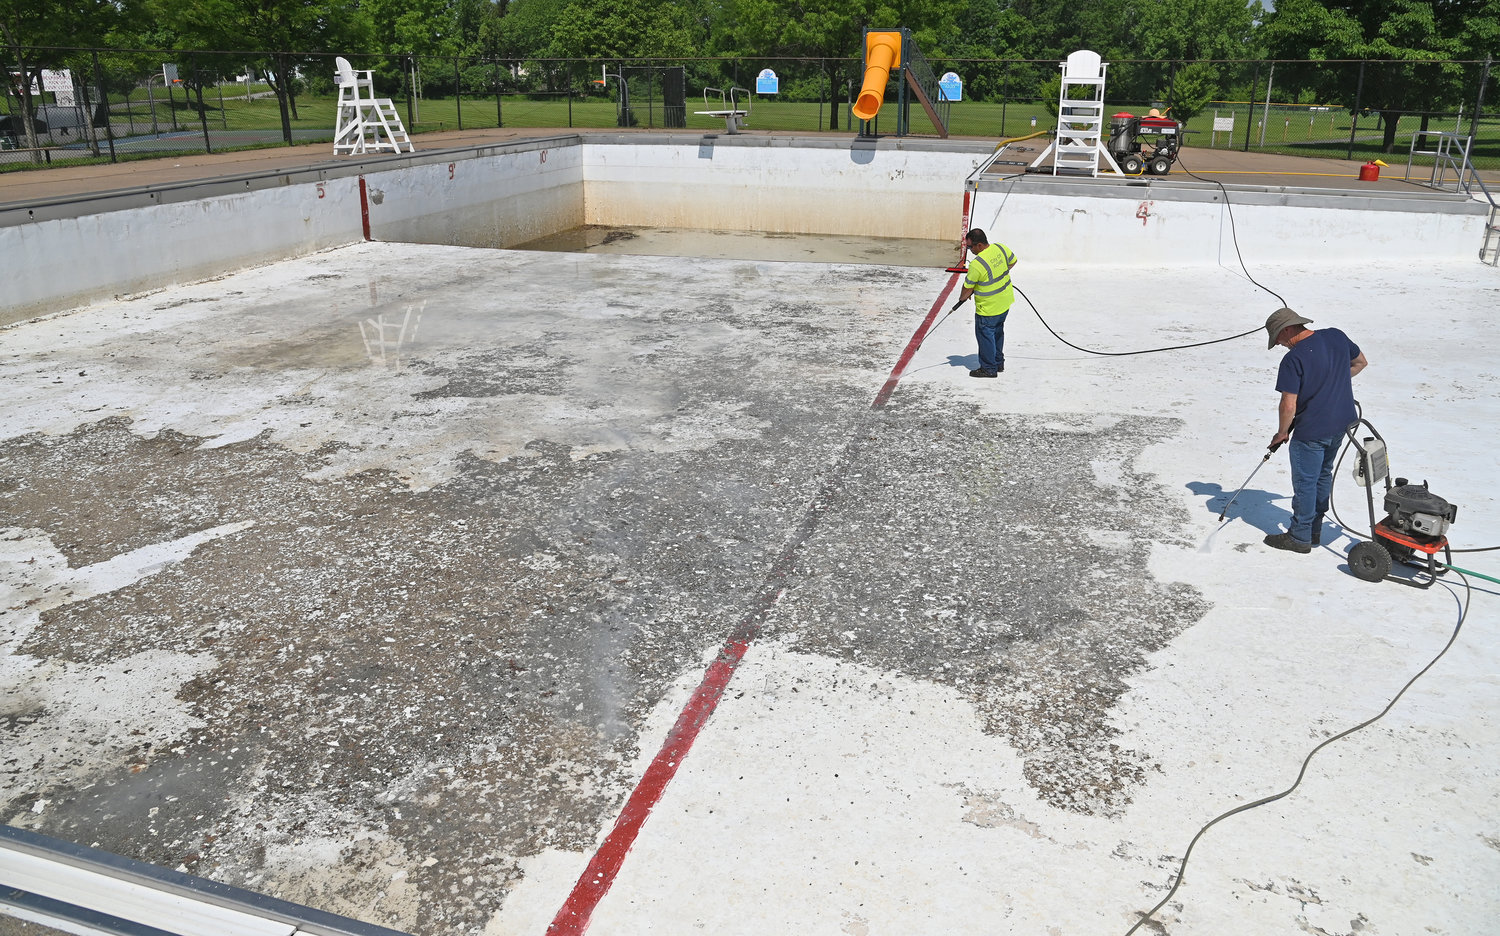 GETTING READY FOR SUMMER — City Parks employees Lenny Costello and Dave Bruno pressure wash grime and old paint from the bottom of Tosti Pool at Pinti Field on Monday. Crews will paint the pool before filling it and re-opening for the start of the swimming season in July. The Michael Uvanni Municipal Pool on West Embargo Street and the Guyer Field pool on Laurel Street will also open —but City Parks &amp; Recreation Director James Korpela said the city is only opening three of its five pools this summer due to a lack of lifeguards.  He said the city had to contract with the YMCA of the Greater Tri-Valley in order to have enough staff for the three pools to operate.  The department, he said, has plenty of chlorine to keep its pools clean this season after reports hit last month there may be a shortage of chlorine tablets this year due to a fire at a chemical plant in Louisiana. The good news for hot city residents is that it will cost less to swim this year as the city is  waiving its $1 admission fee for using the pools this year.